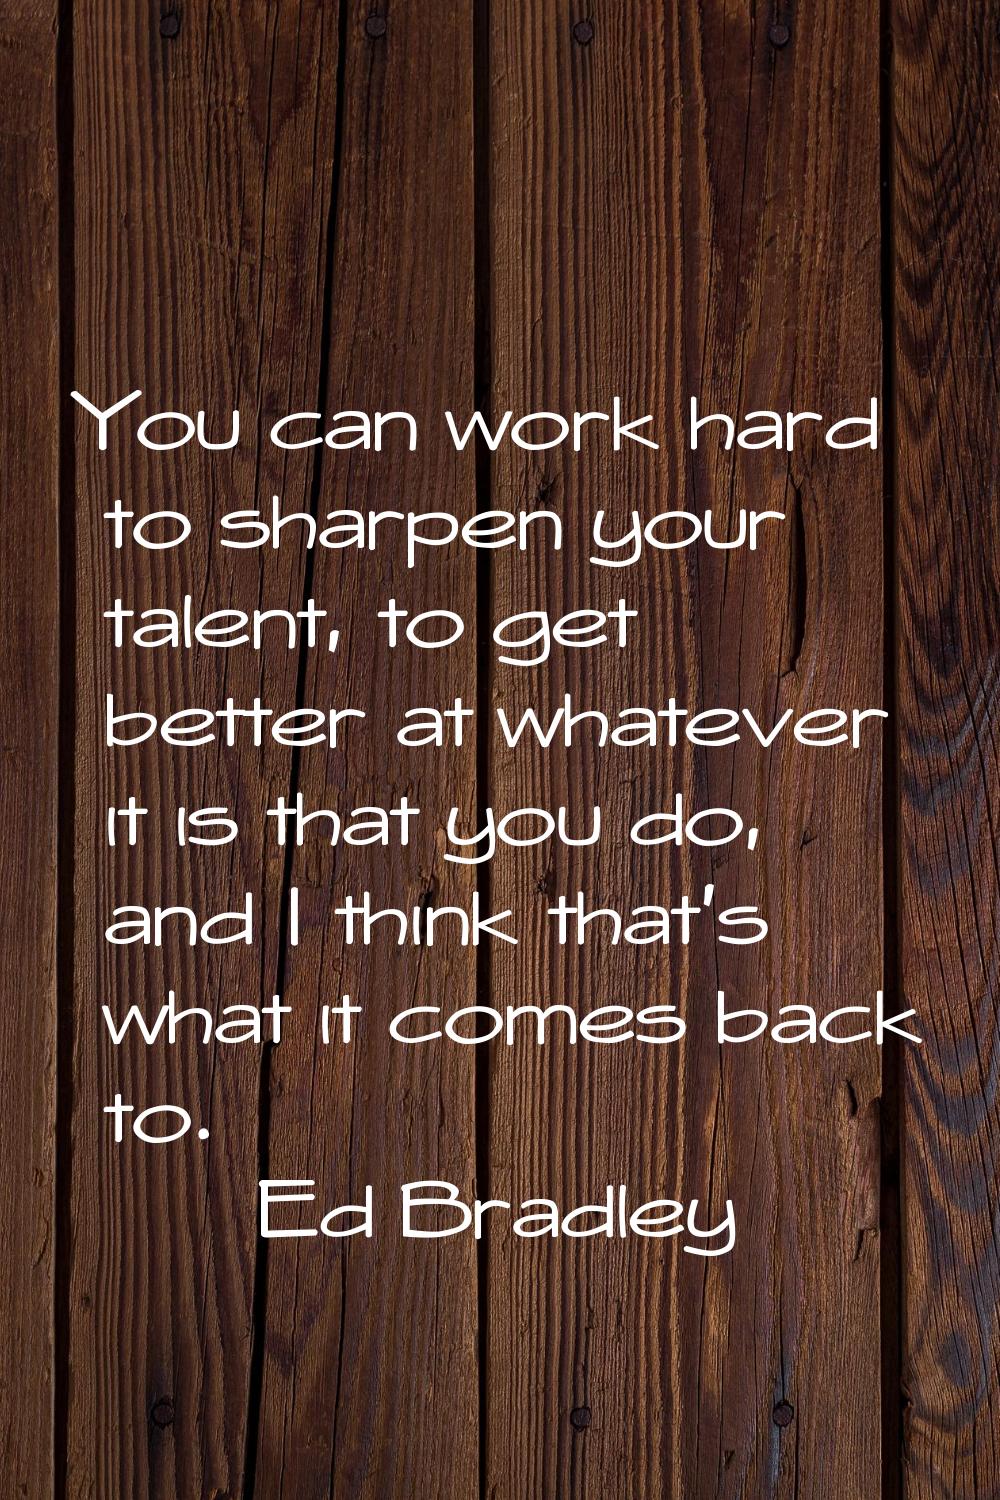 You can work hard to sharpen your talent, to get better at whatever it is that you do, and I think 